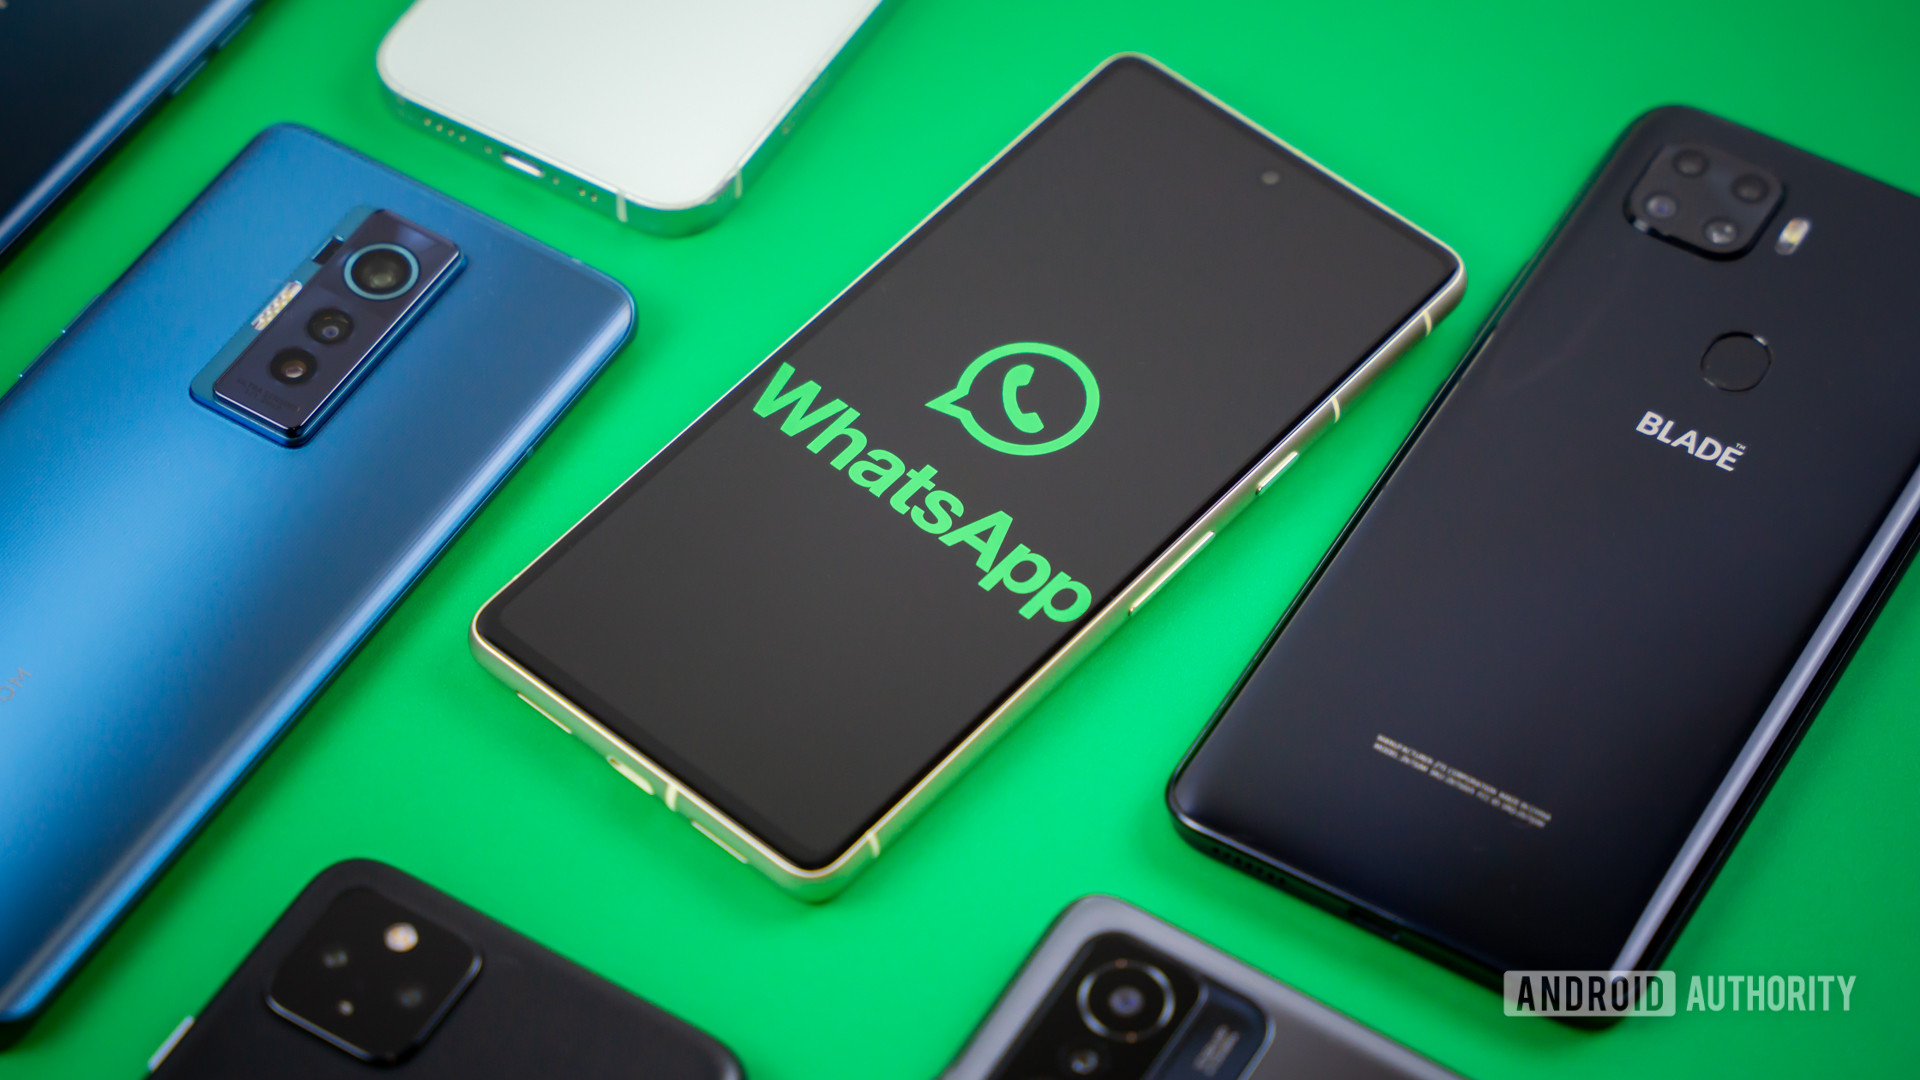 WhatsApp logo on smartphone next to other devices Stock photo 3